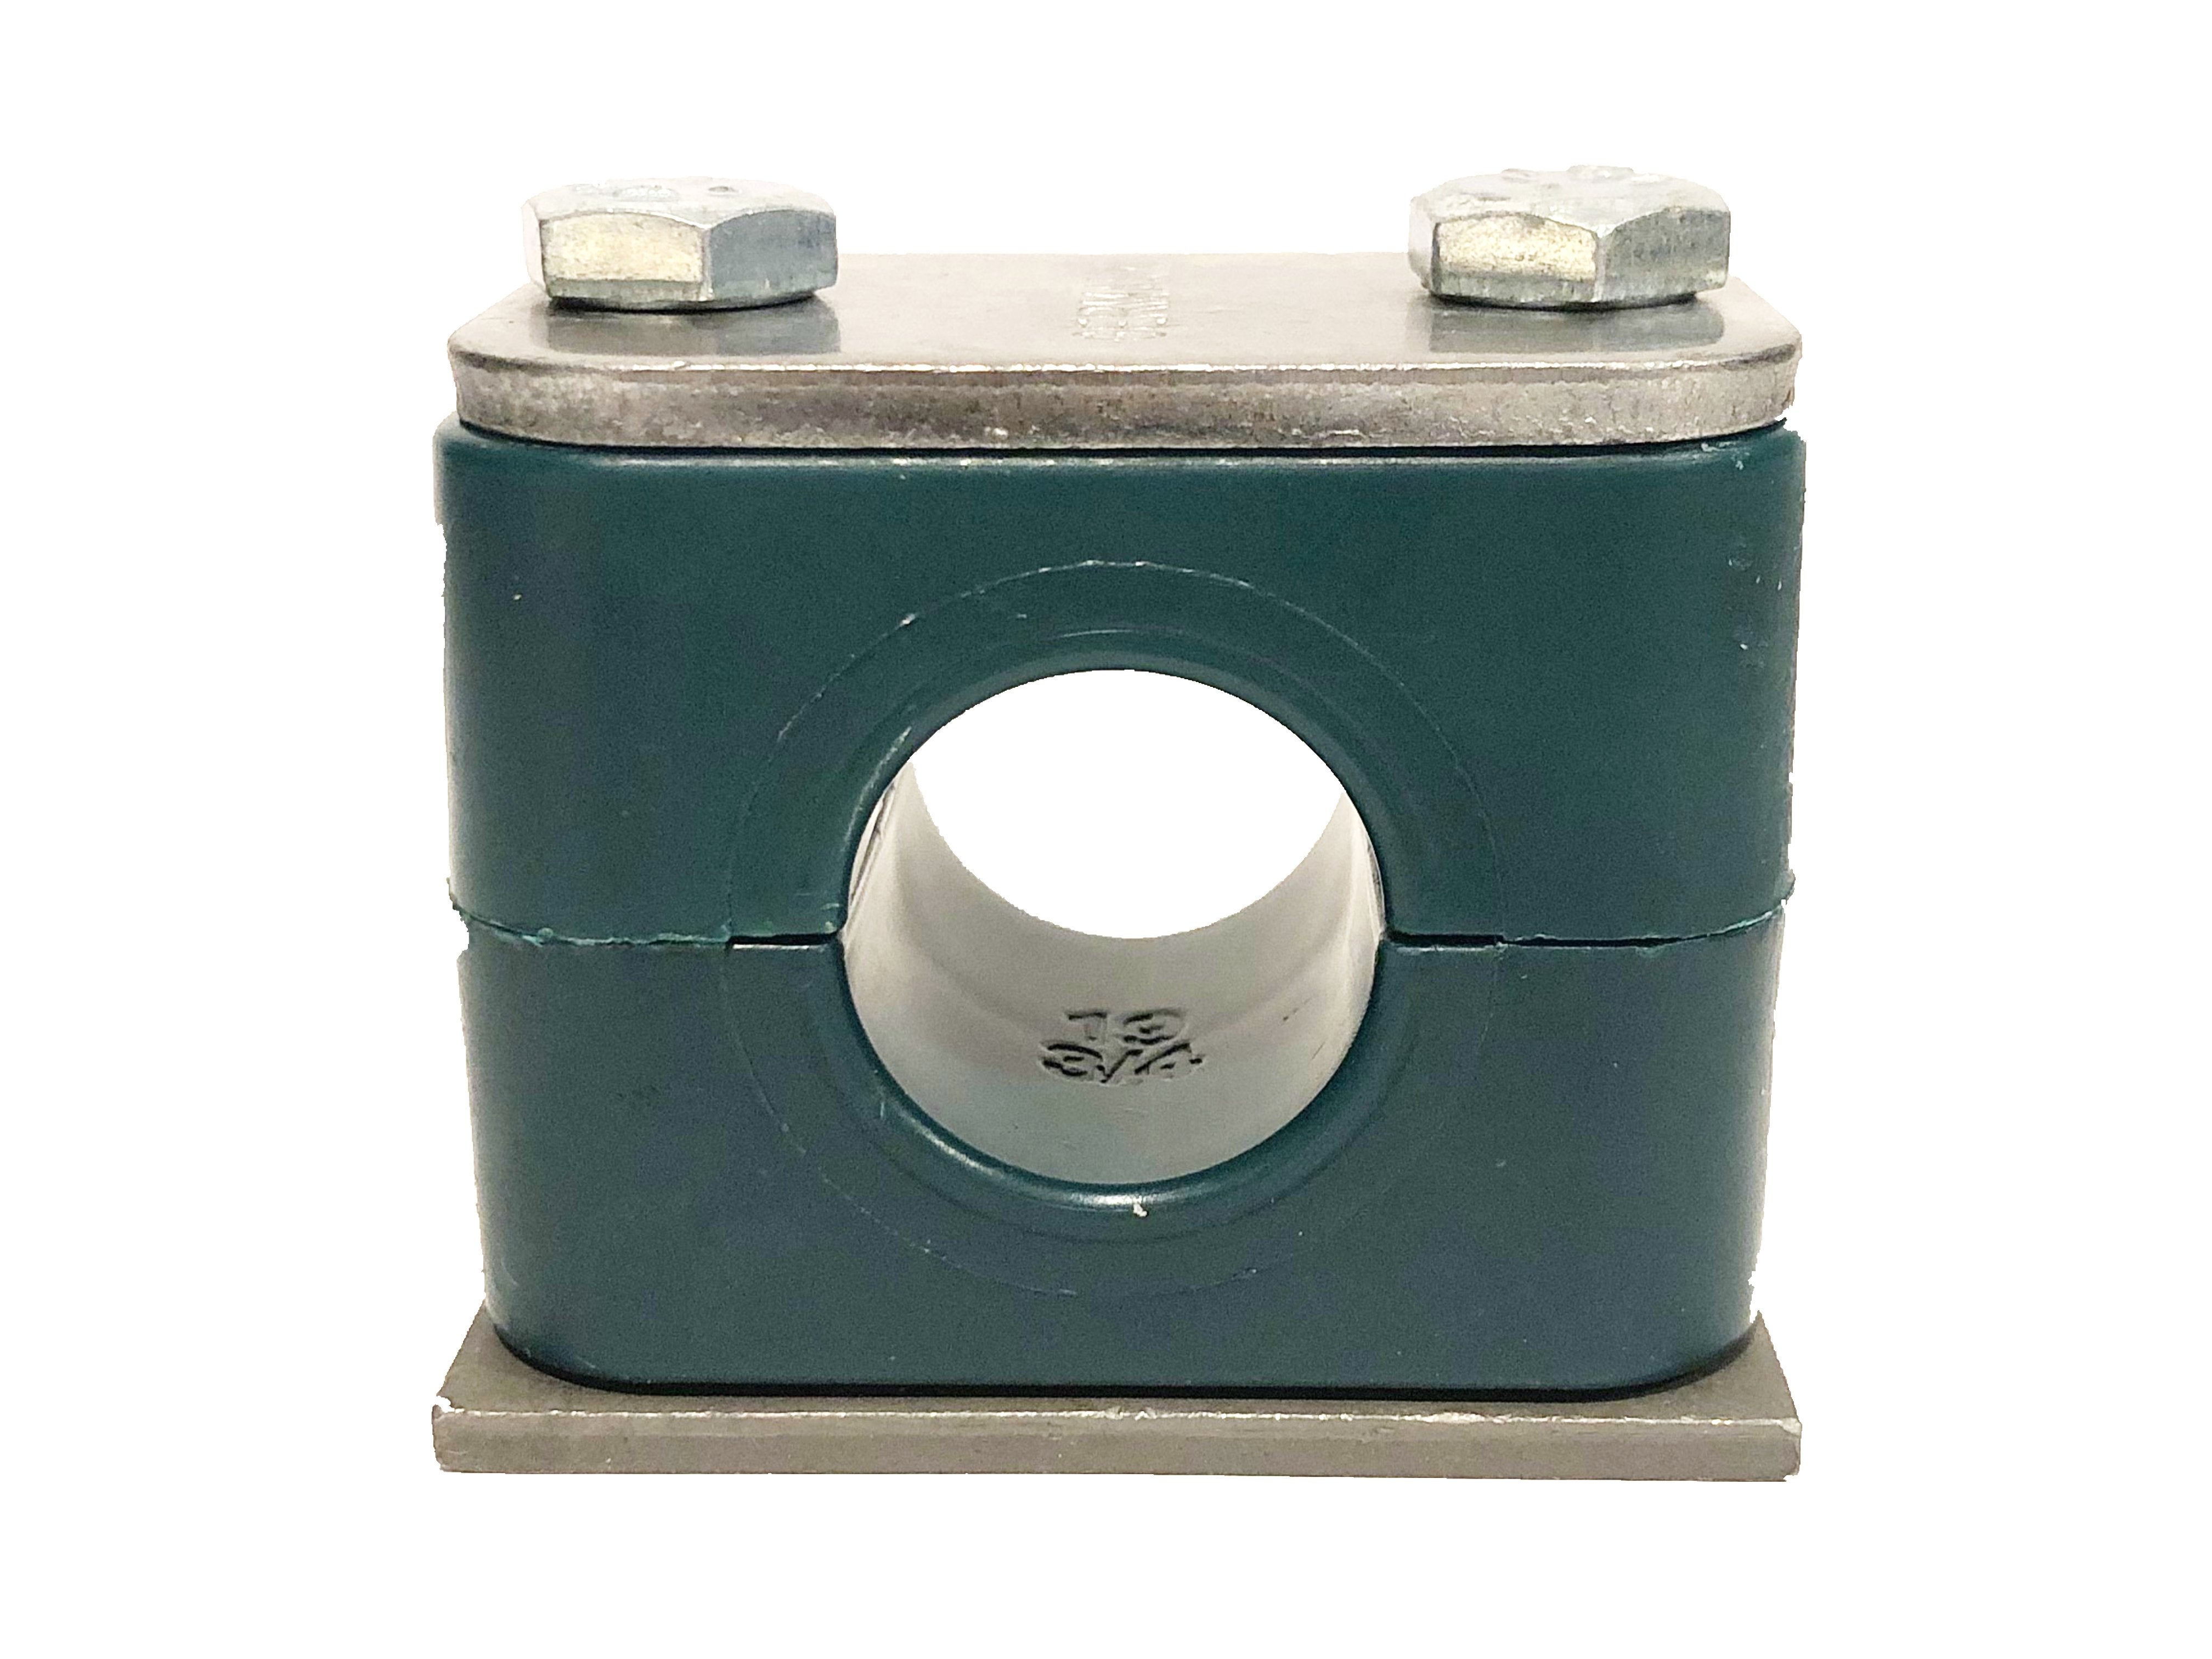 SP-648.3-PP-H-DP-AS-U-W5 : Stauff Clamp, Single Weld Plate, 1.9" (48.3mm) OD, for 1.5" Pipe, Green PP Insert, Smooth Interior, 316SS